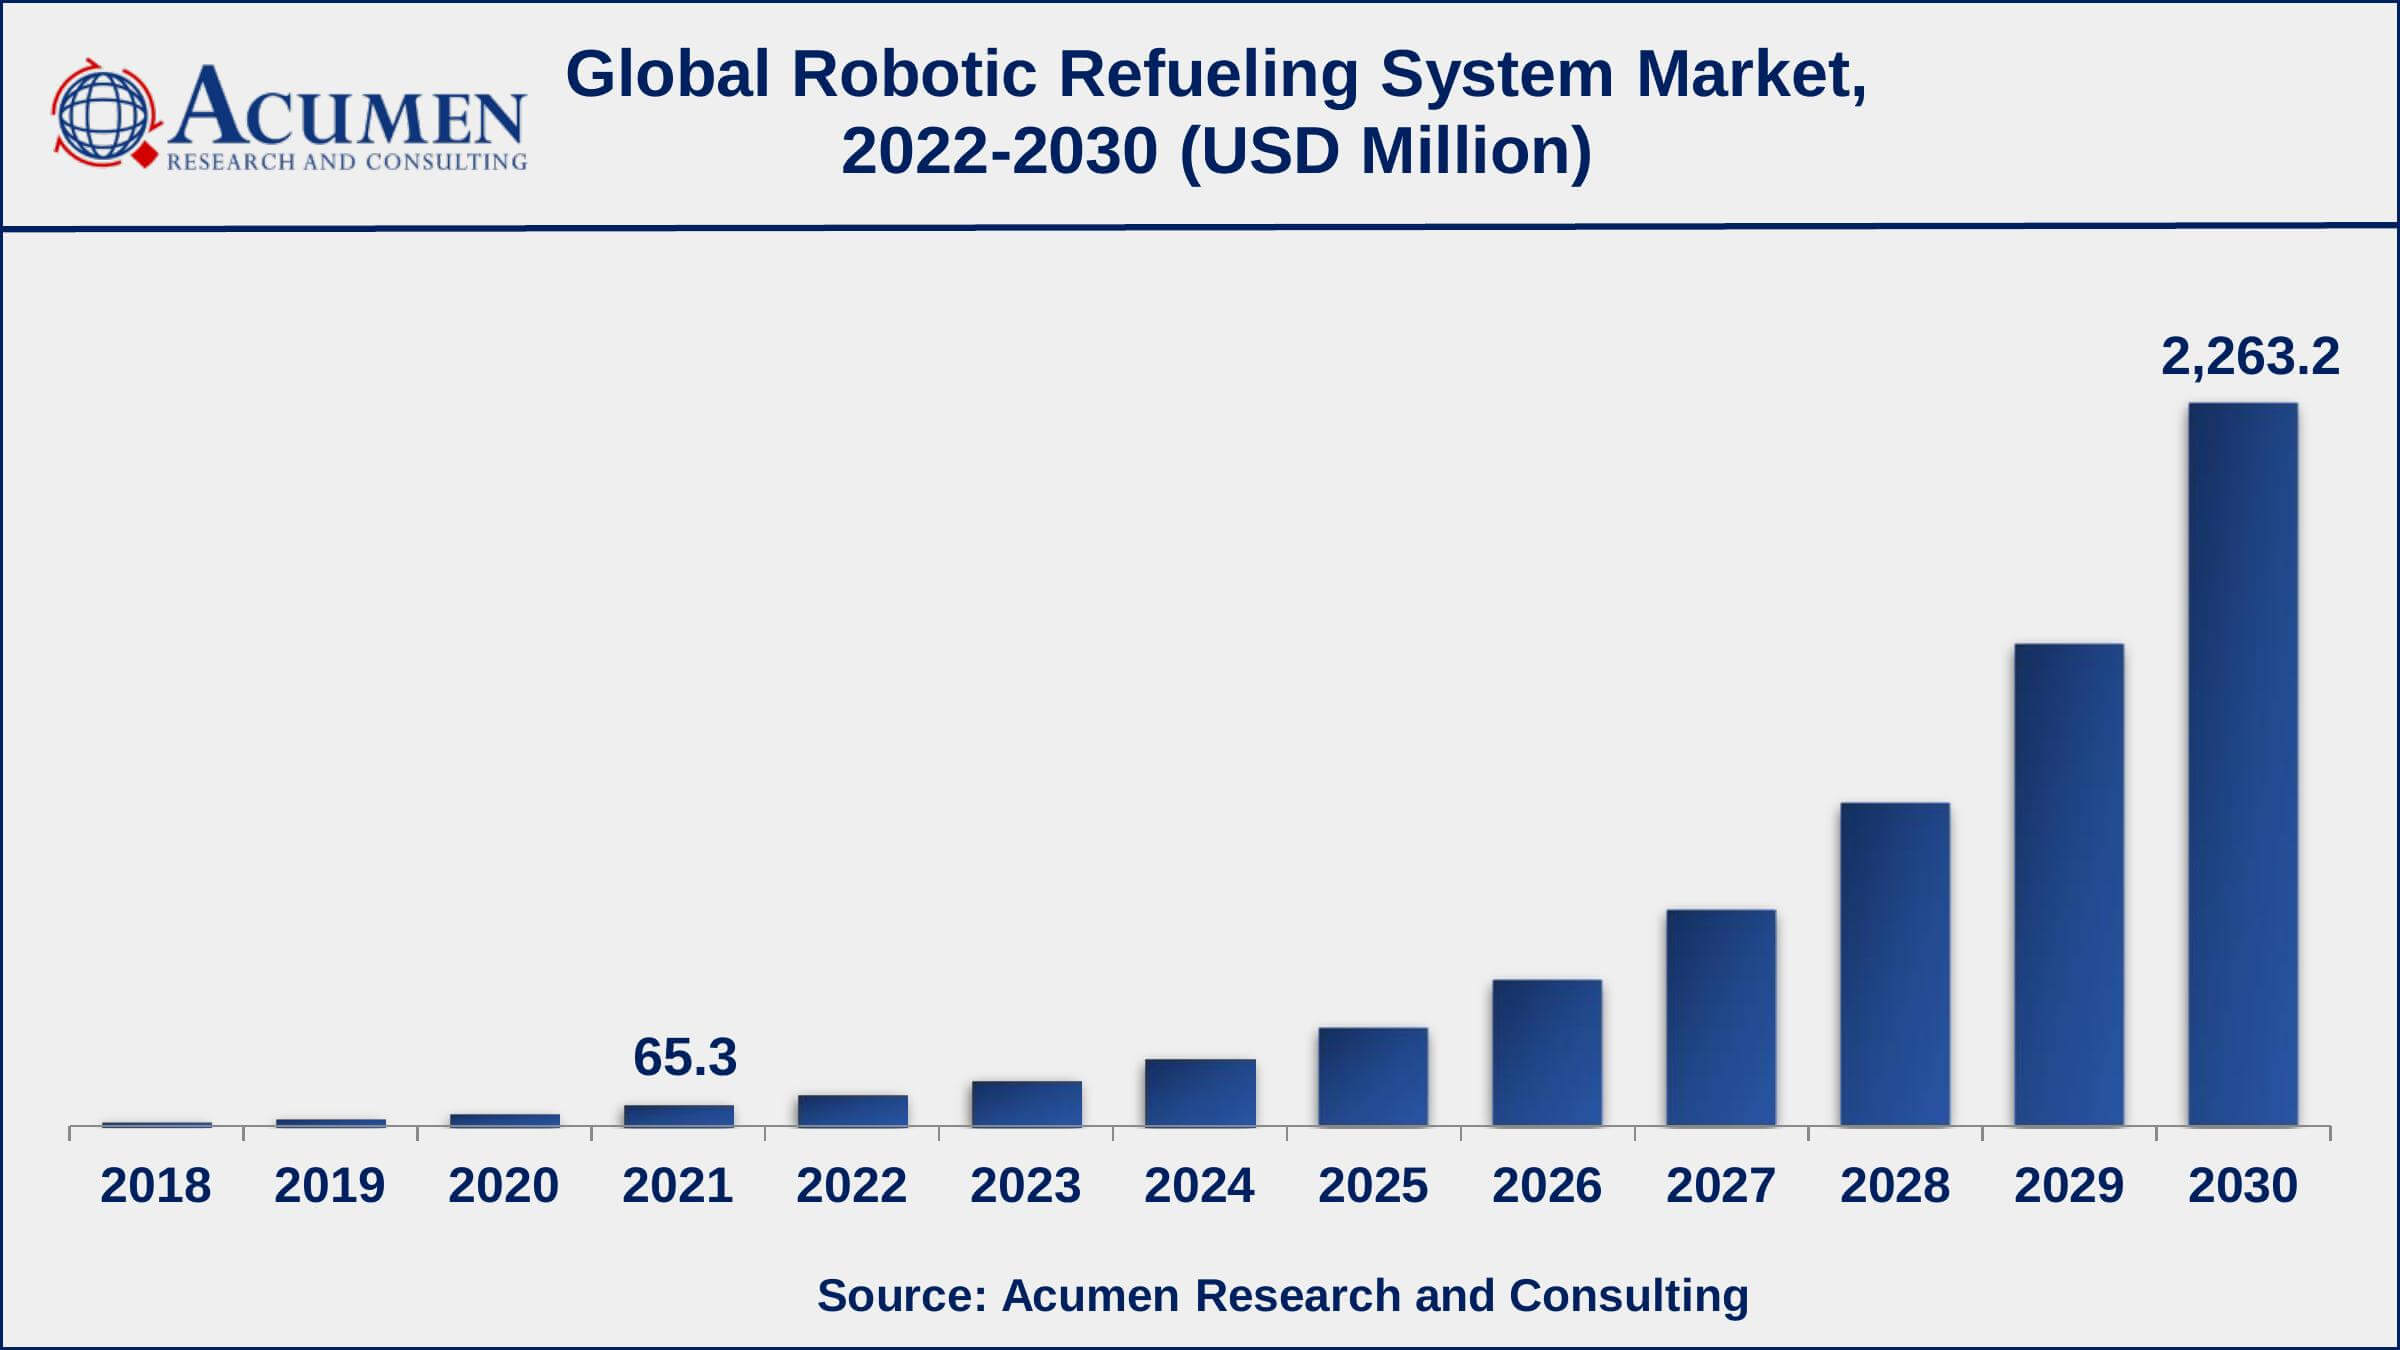 Asia-Pacific robotic refueling system market growth will record a CAGR of more than 49% from 2022 to 2030